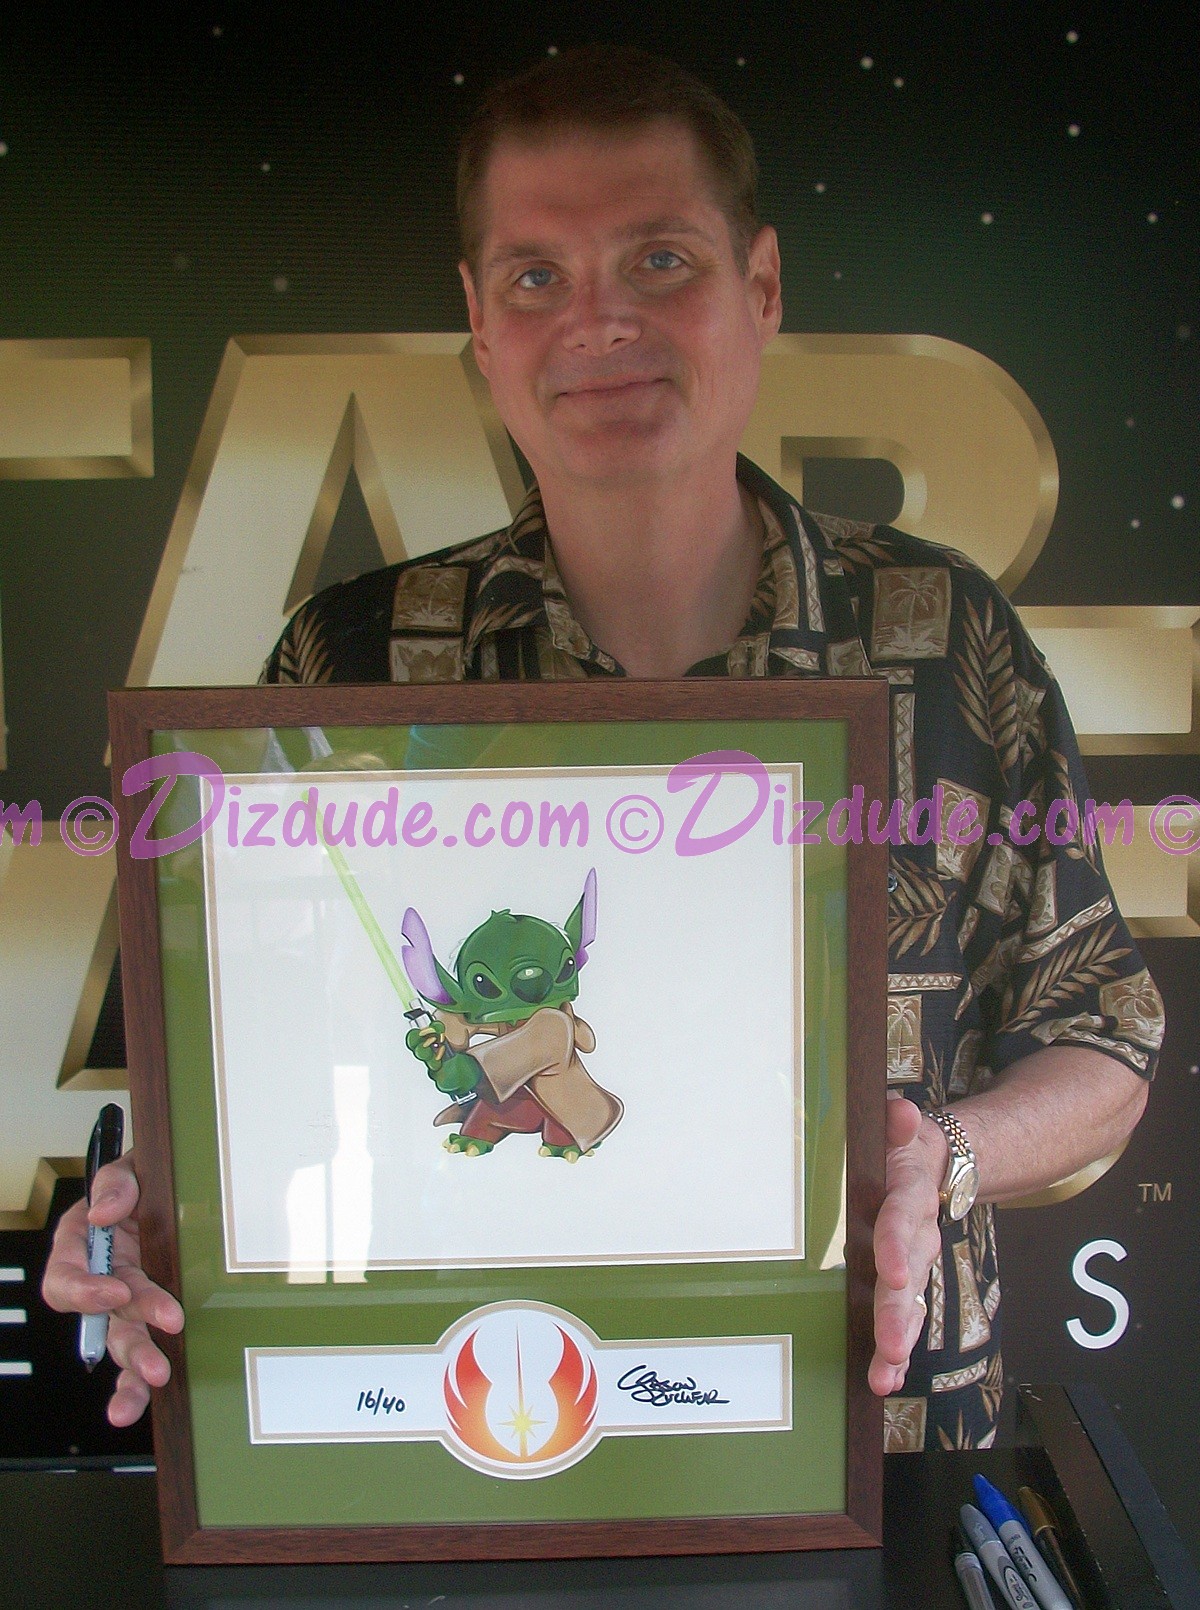 Tom Kane "The Voice of Yoda" Holding this beautiful "Stitch as Yoda" Nr 16 illustration June 10, 2011 at Star Wars Weekends ~ © DIZDUDE.com